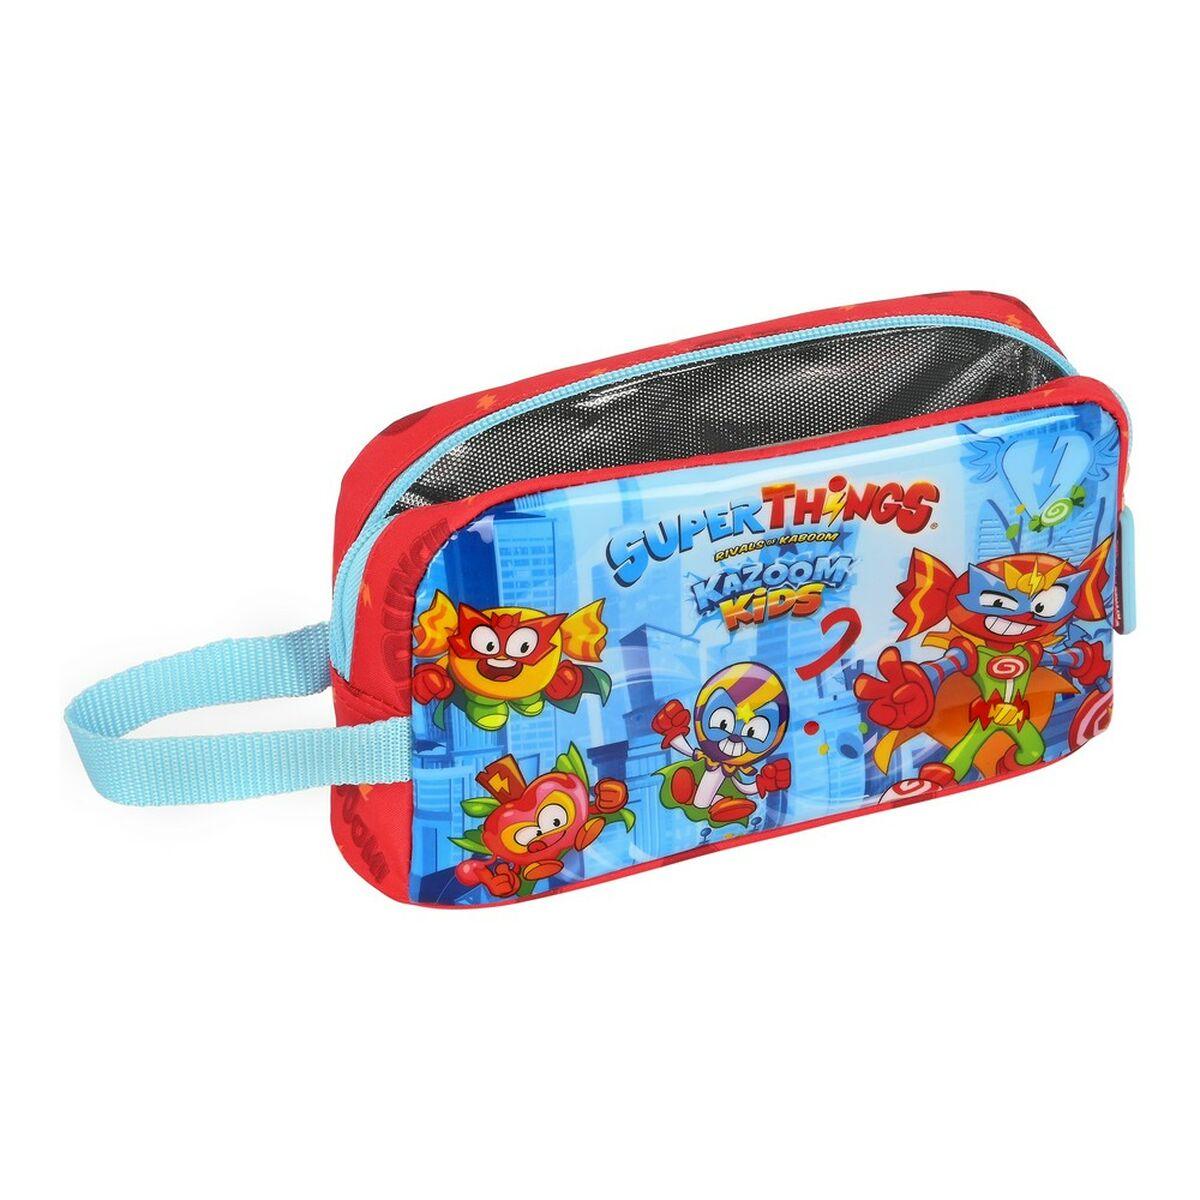 Thermal Lunchbox SuperThings Kazoom Kids Red Light Blue (21.5 x 12 x - VirtuousWares:Global